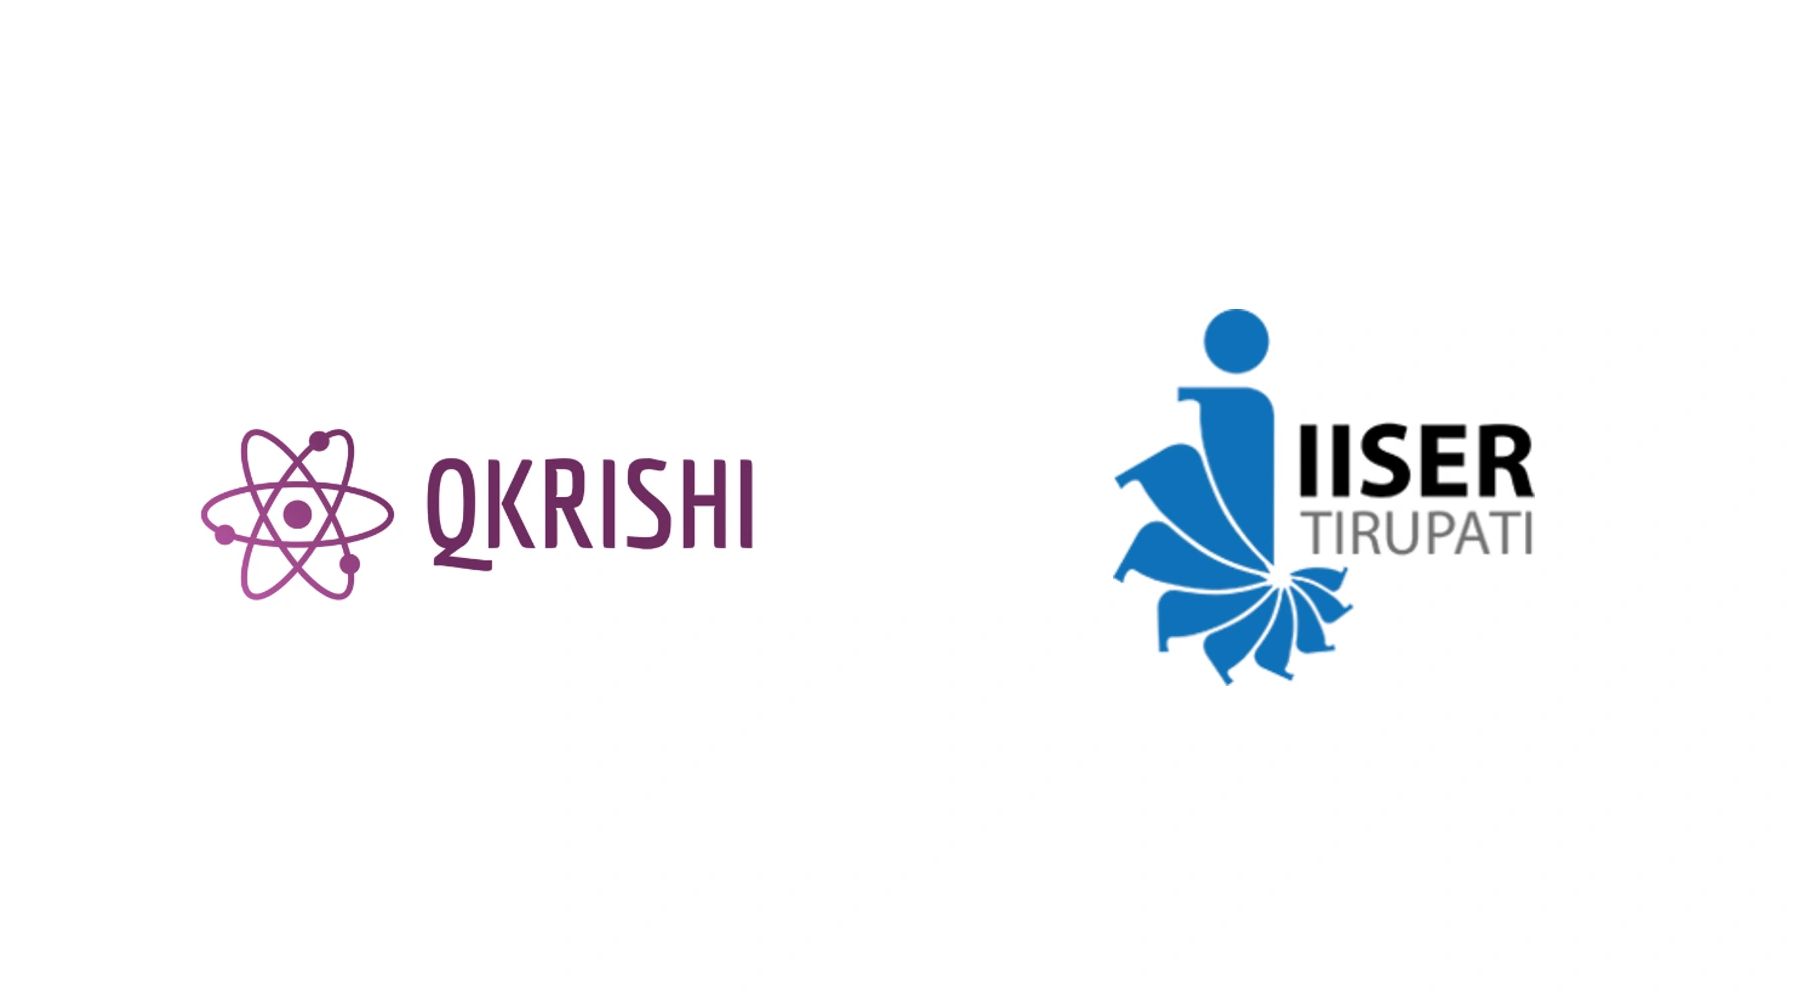 Qkrishi and IISER Tirupati jointly offer a course on quantum computing